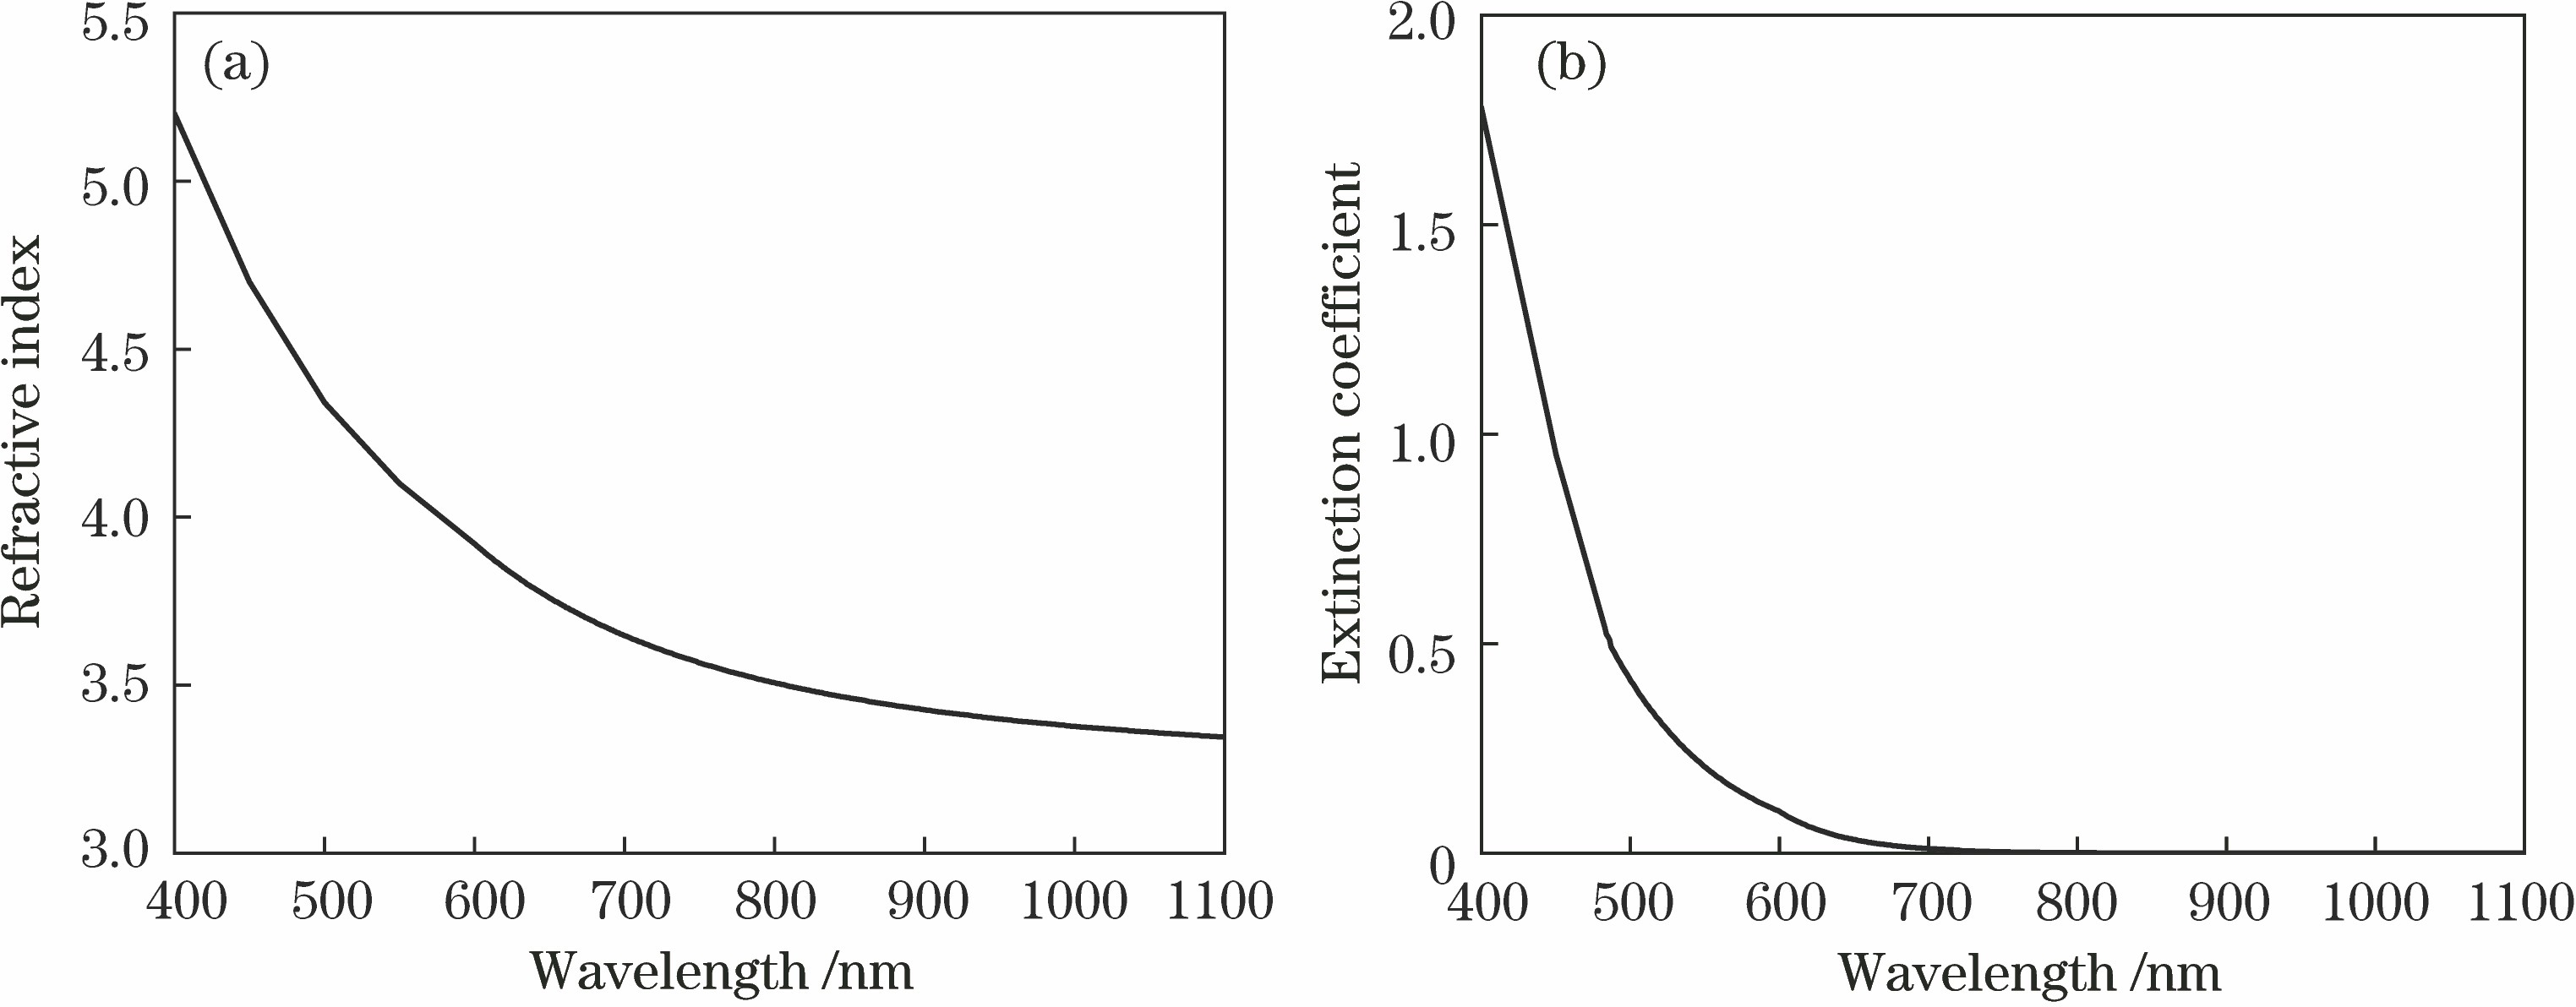 Optical constants of Si-H materials. (a) Refractive index; (b) extinction coefficient